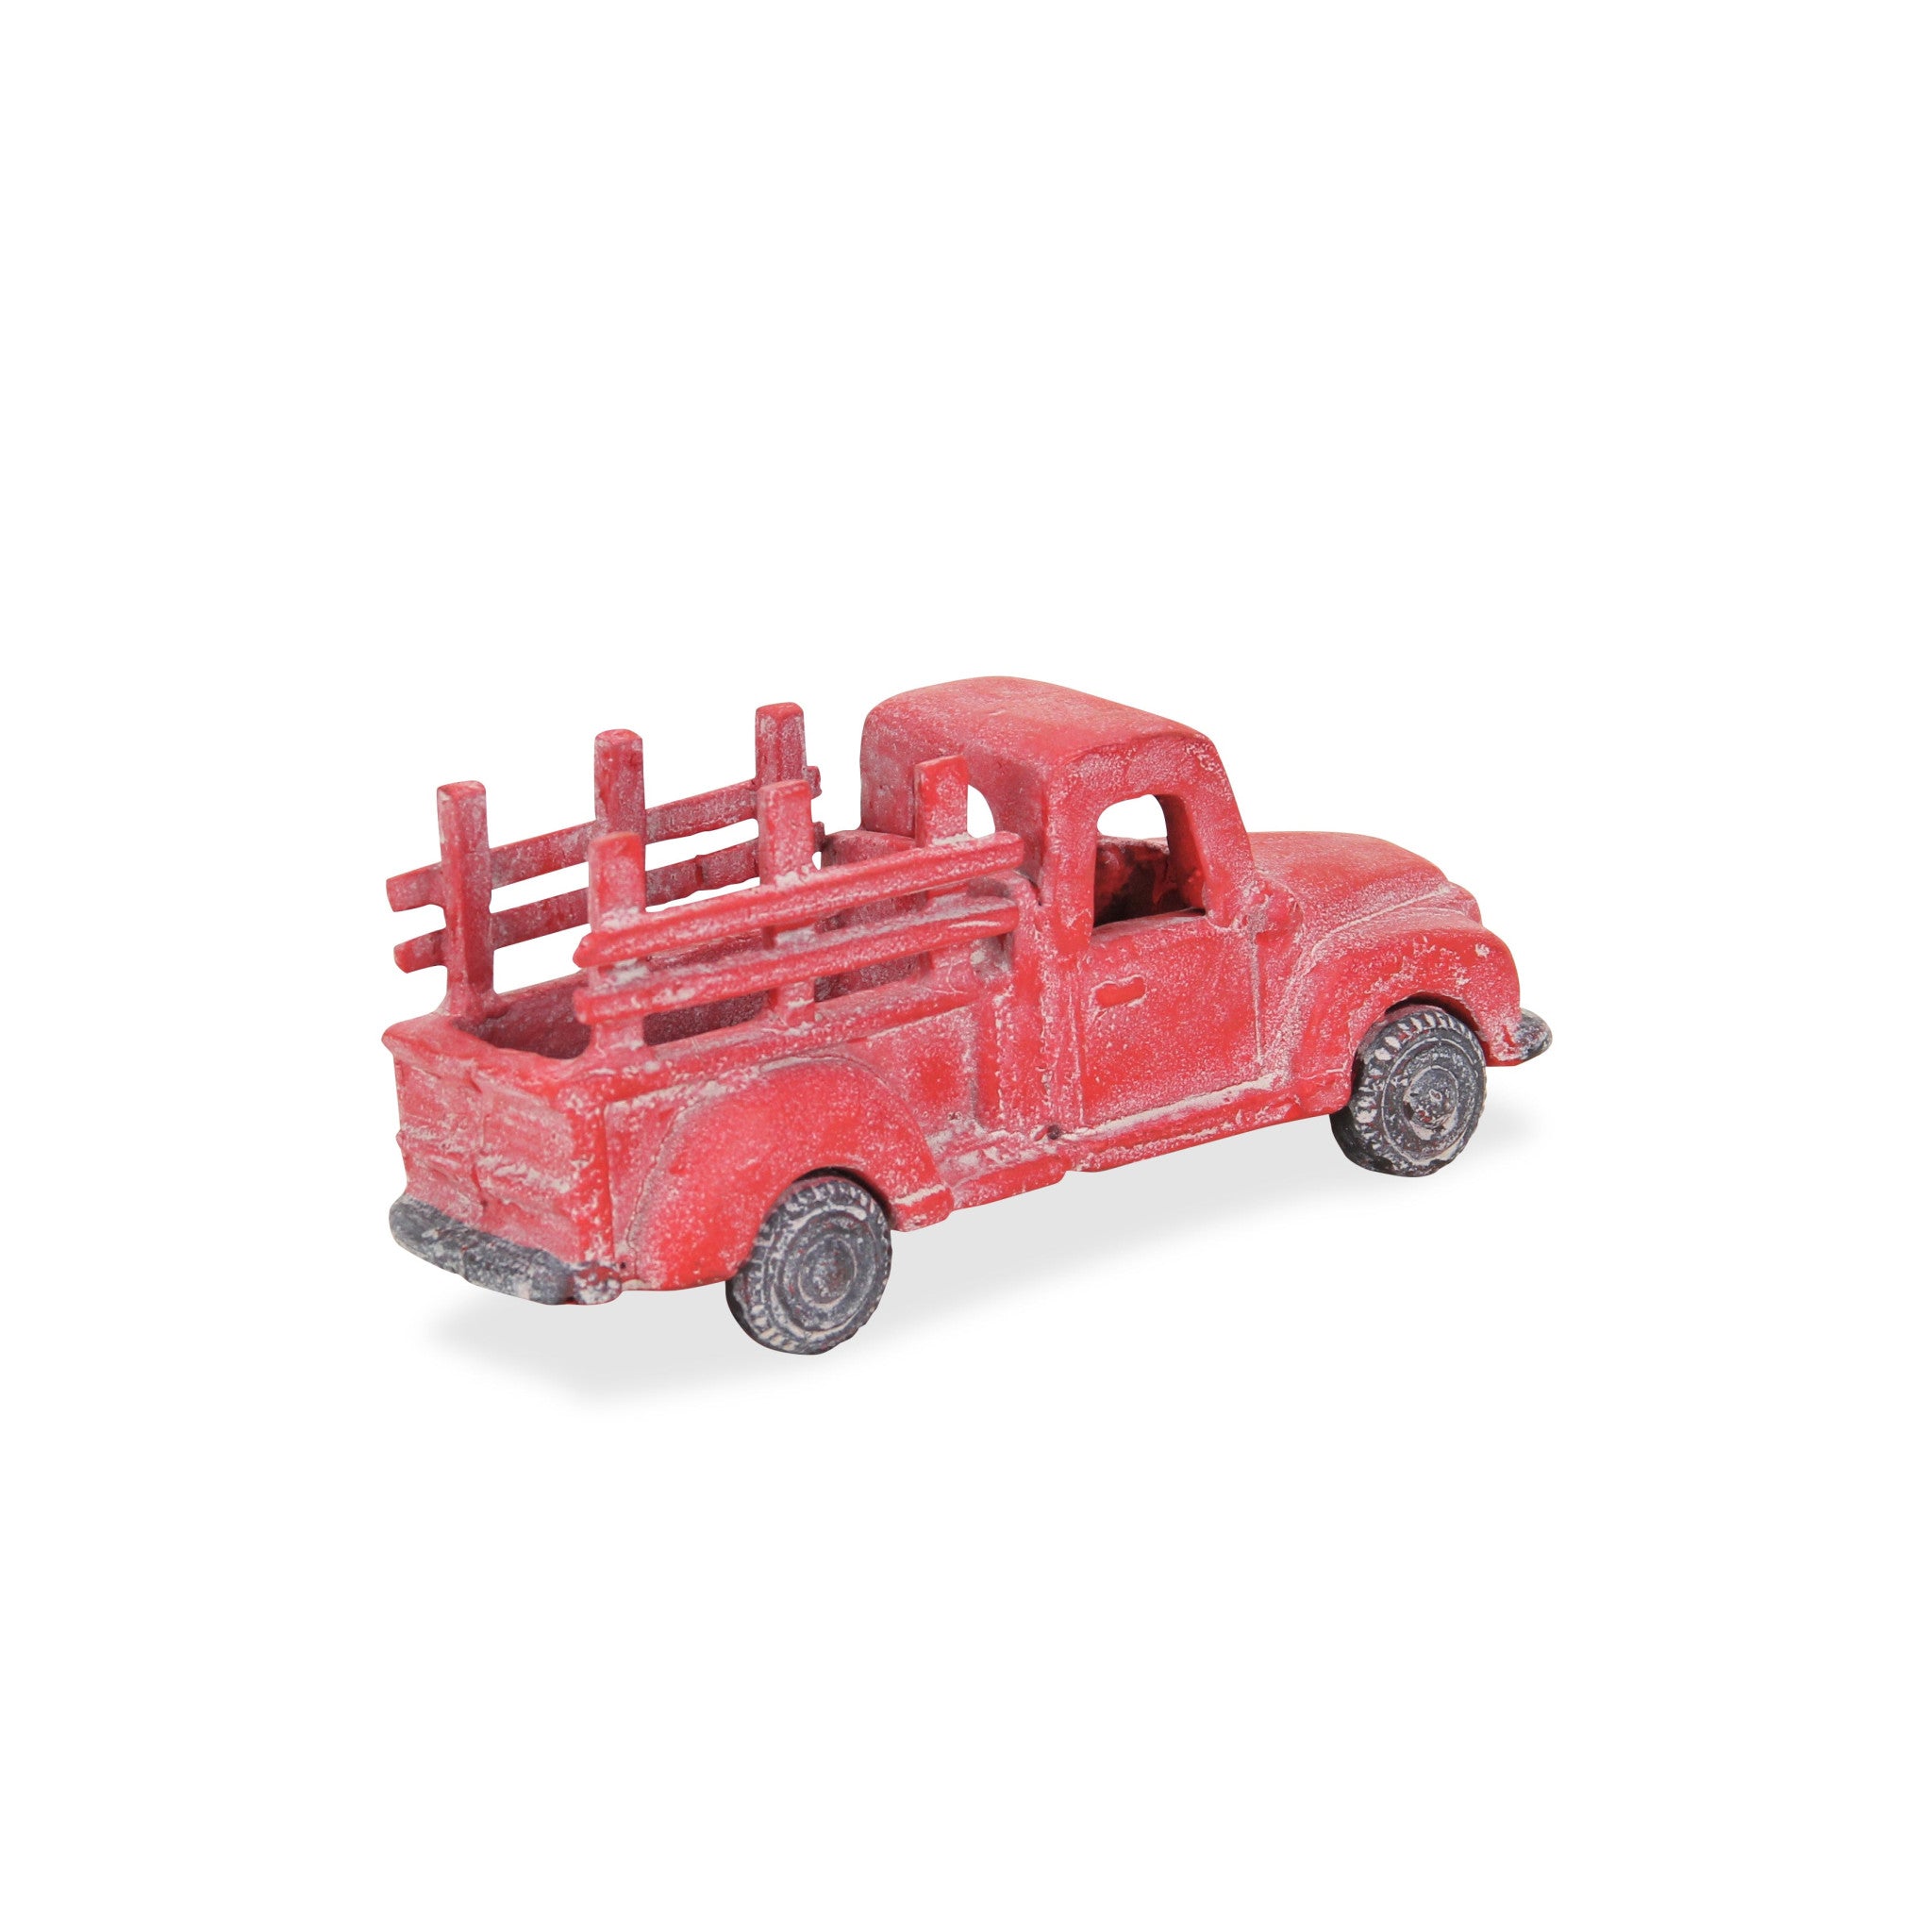 5" Red Metal Truck Hand Painted Decorative Truck